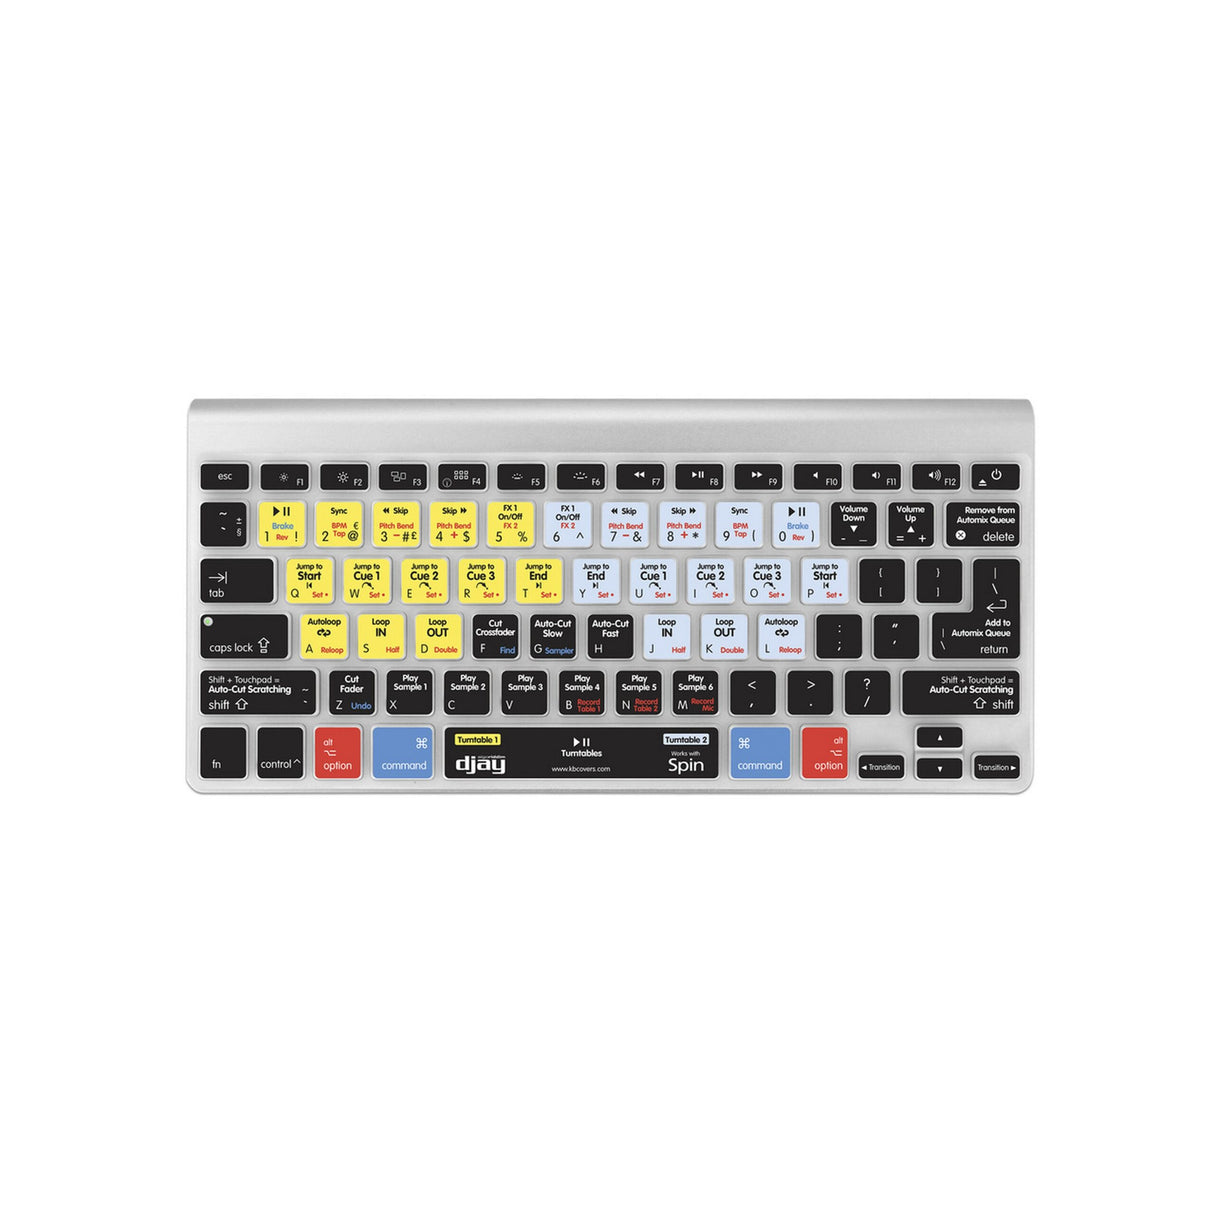 KB Covers DJ-M-CC-2 djay Keyboard Cover for MacBook/Air 13/Pro 2008+/Retina and Wireless